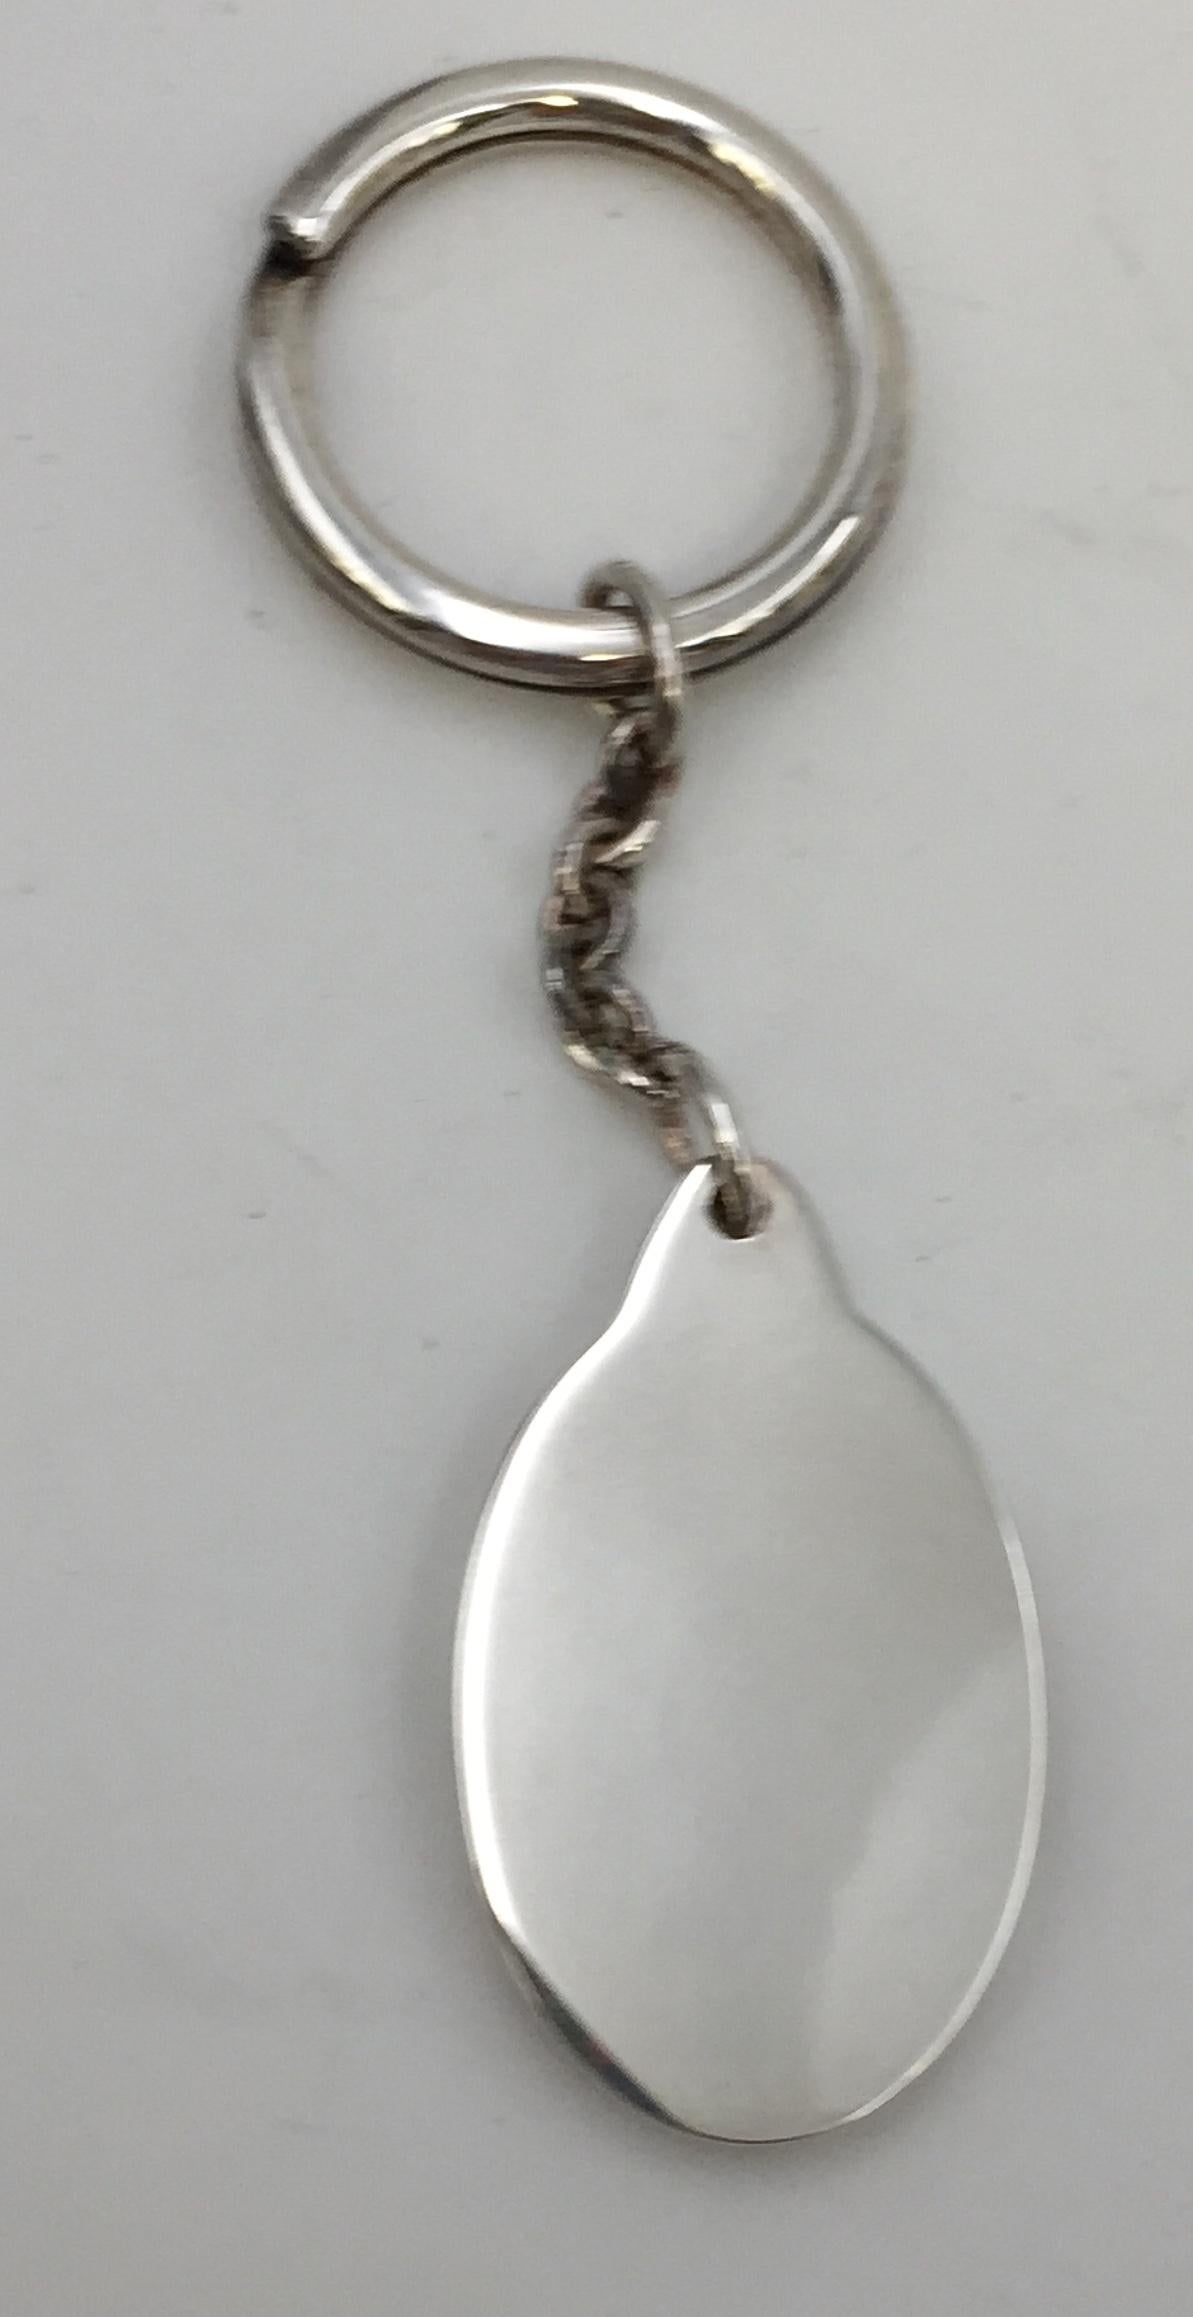 Bulgari sterling silver keychain, unique heavy gage silver. Accessorize in style with this classic piece. Beautiful gift for a new home, car, office, housewarming, birthday, Father's Day, Mother's Day, new job, graduation or retirement. Bearing